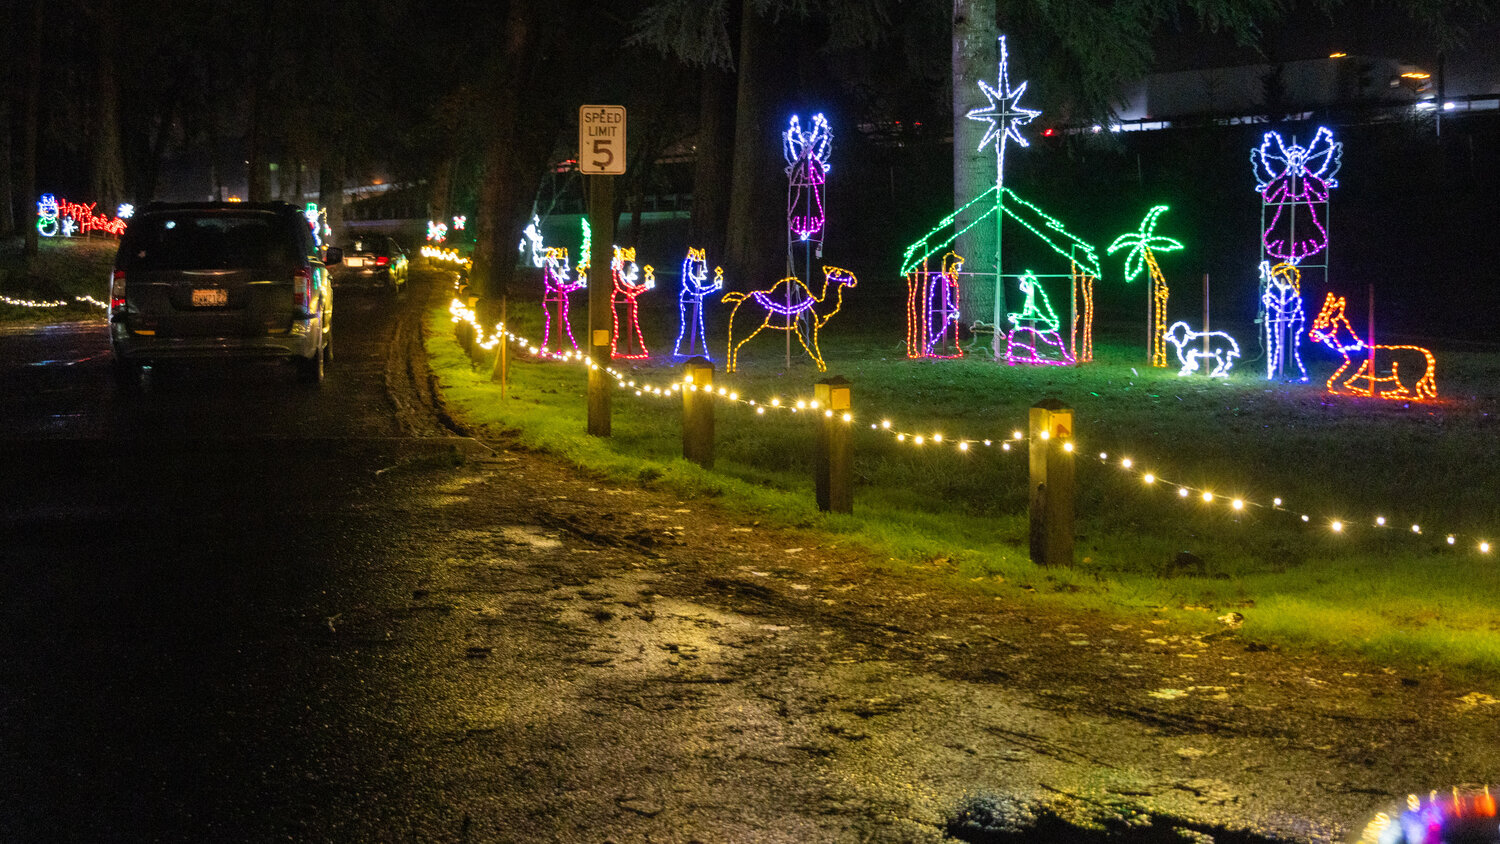 Vehicles drive past a manger scene illuminated with lights at Borst Park in Centralia on Thursday, Dec. 7.